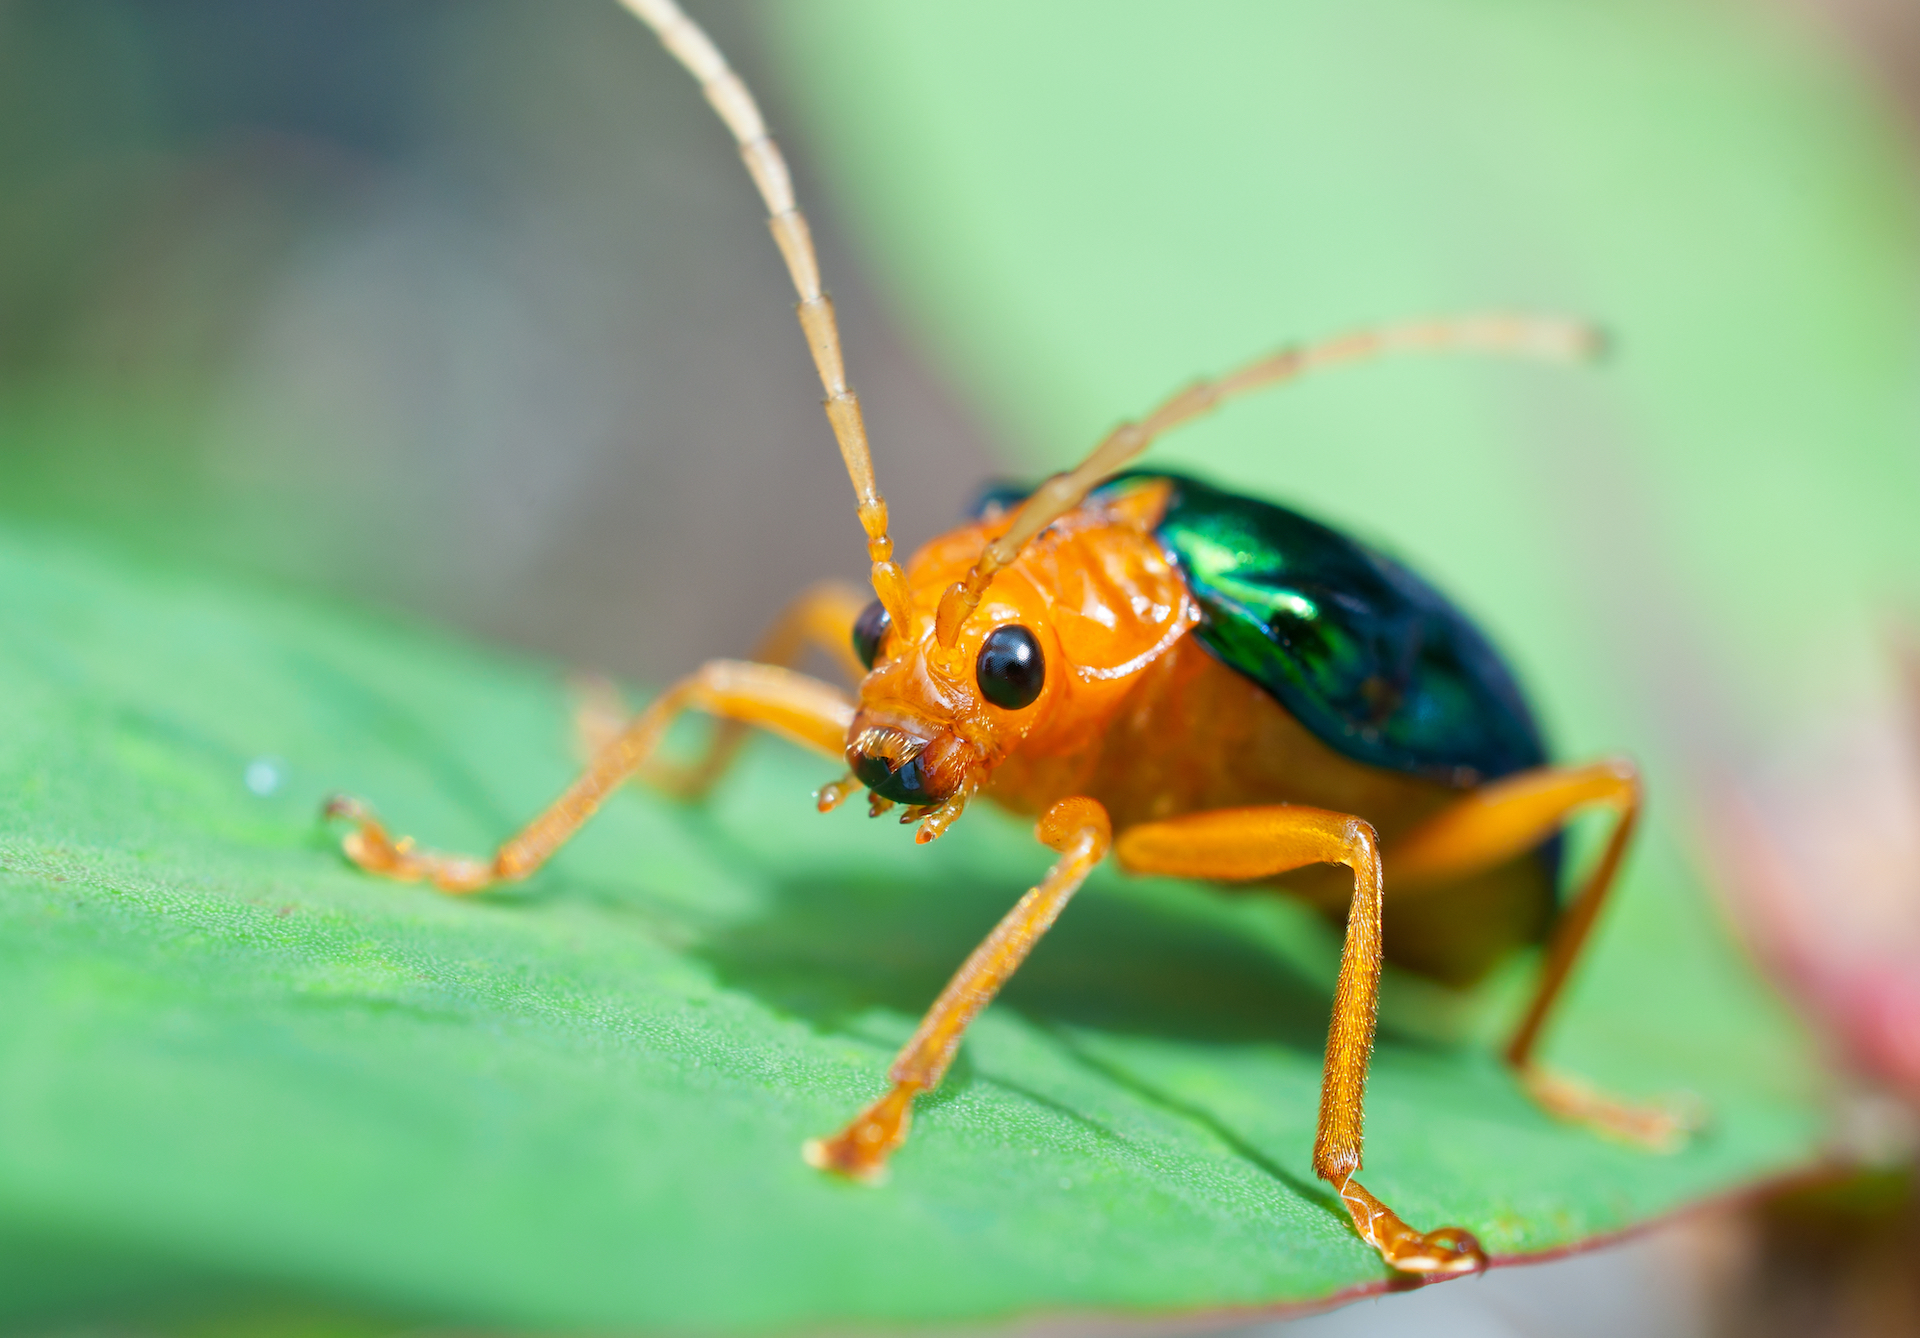 A close-up of a bombardier beetle on a leaf